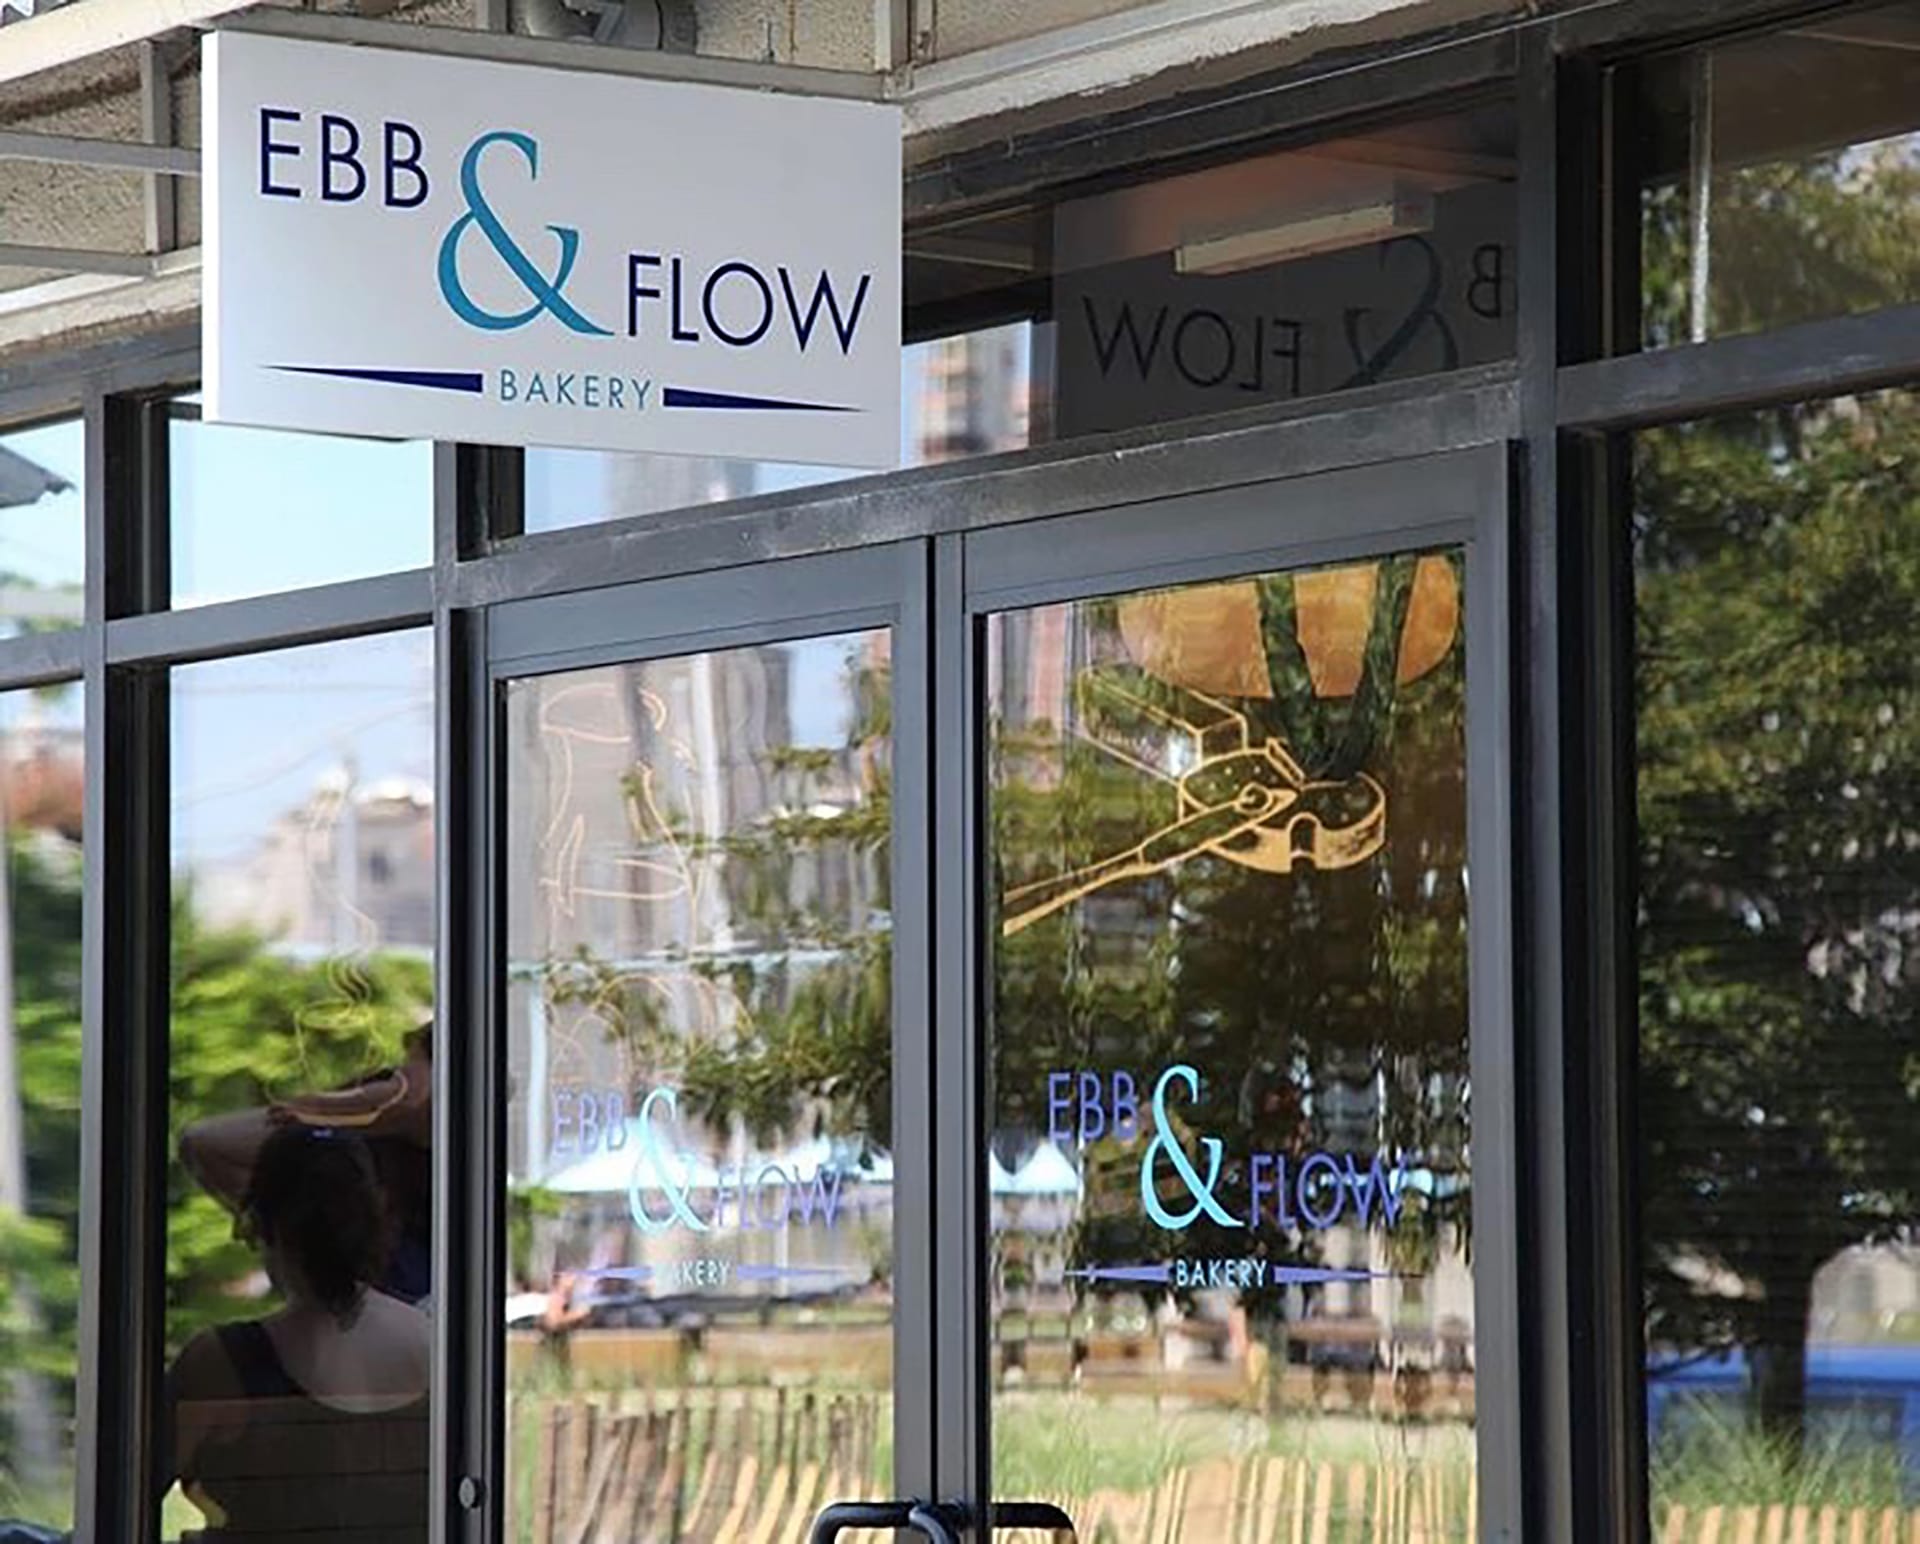 Glass storefront of the Ebb & Flow Bakery with a sign hanging above the door and a chalkboard sign next to the front doors.